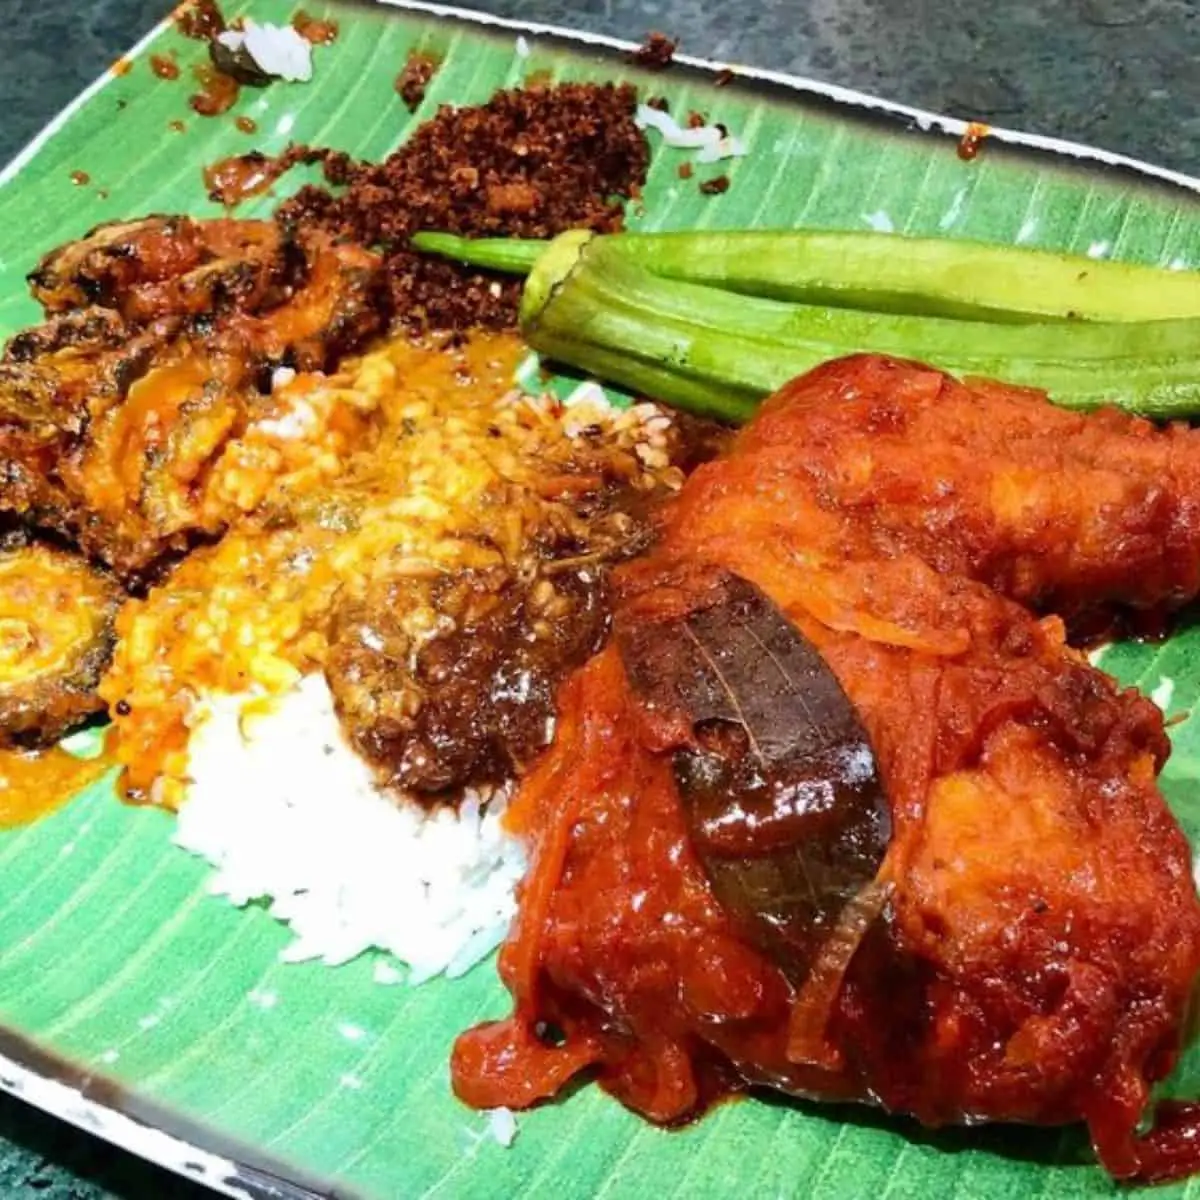 A complete serving of Kayu Nasi Kandar placed in a banana leaf like plate